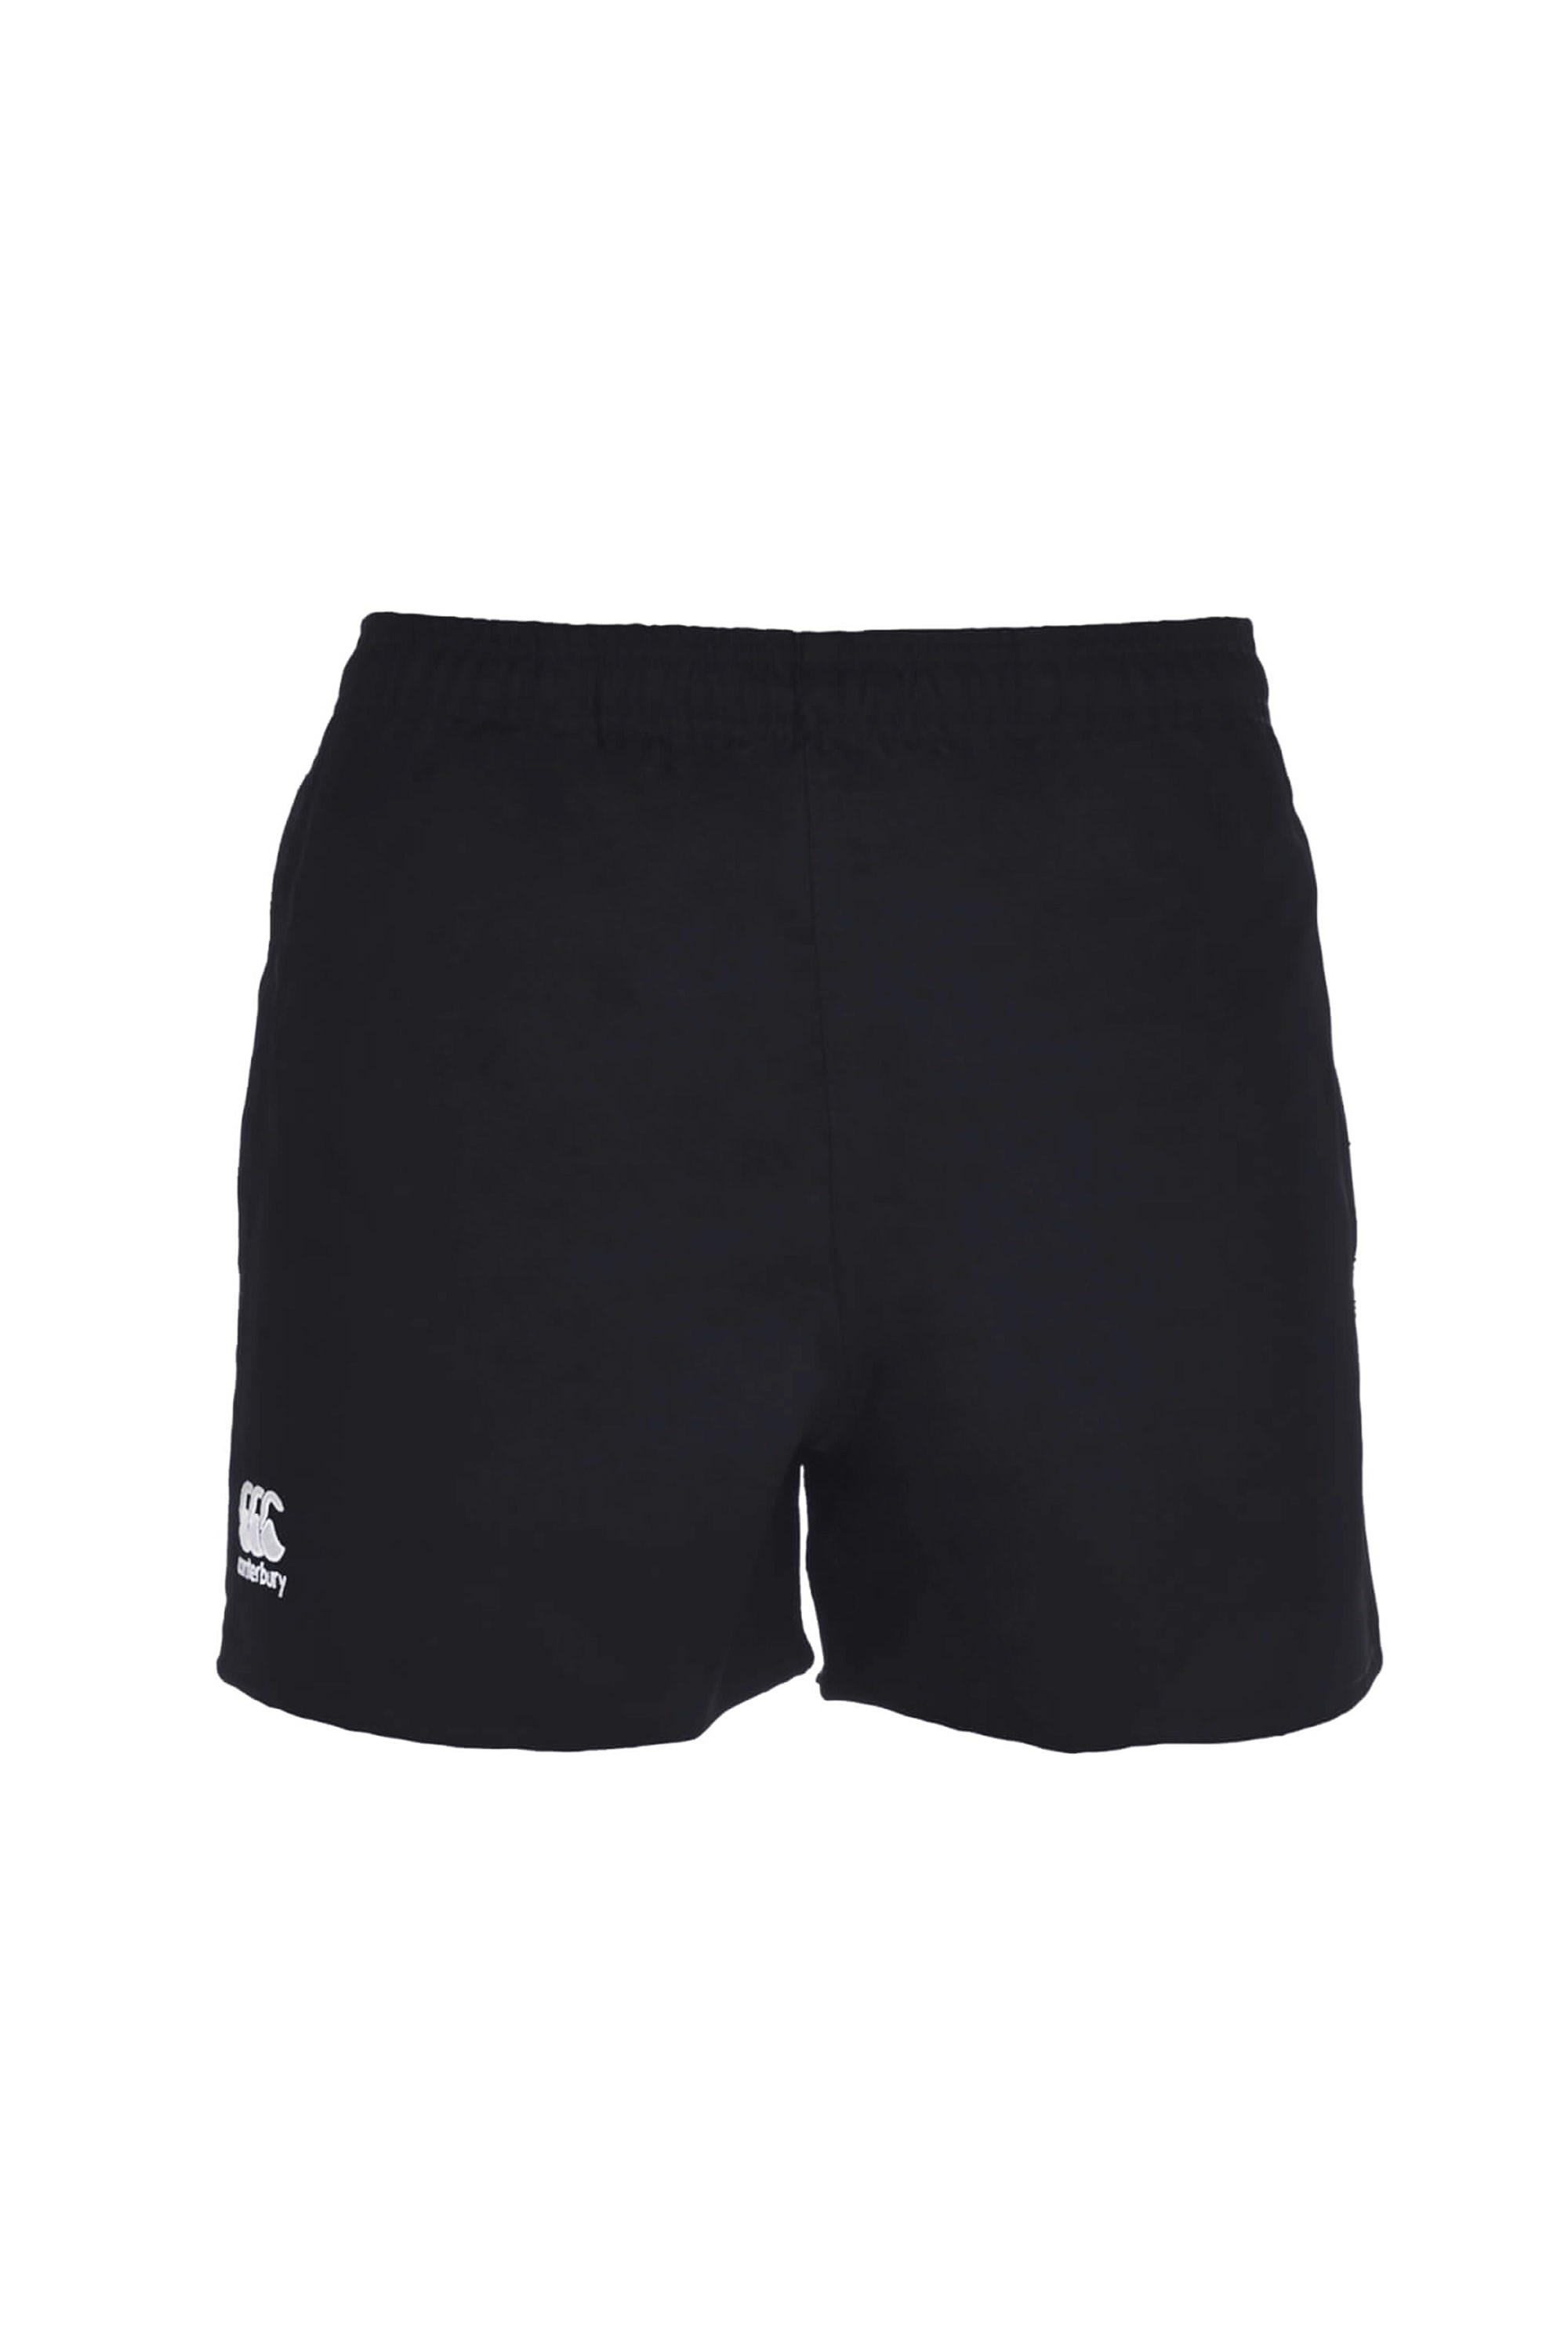 Professional Mens Polyester Shorts -